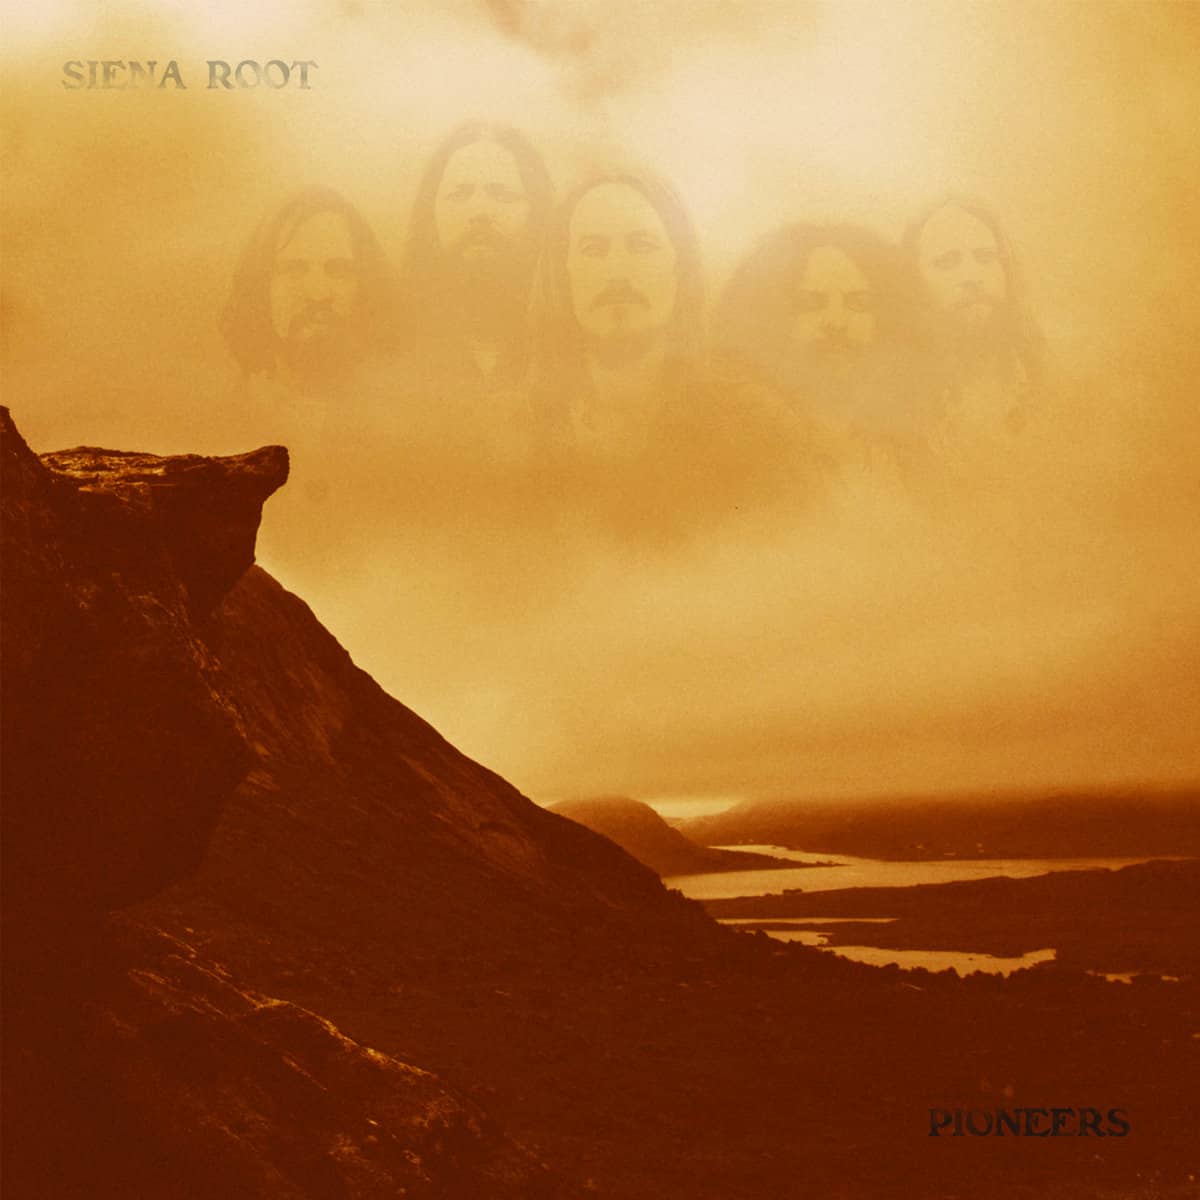 Siena Root - Pioneers LP (Gaphals) <p>100% pure analog sound design!
42 minutes of excellent dynamic root rock
locally produced in Stockholm, Sweden!
CD + Download card included!</p>